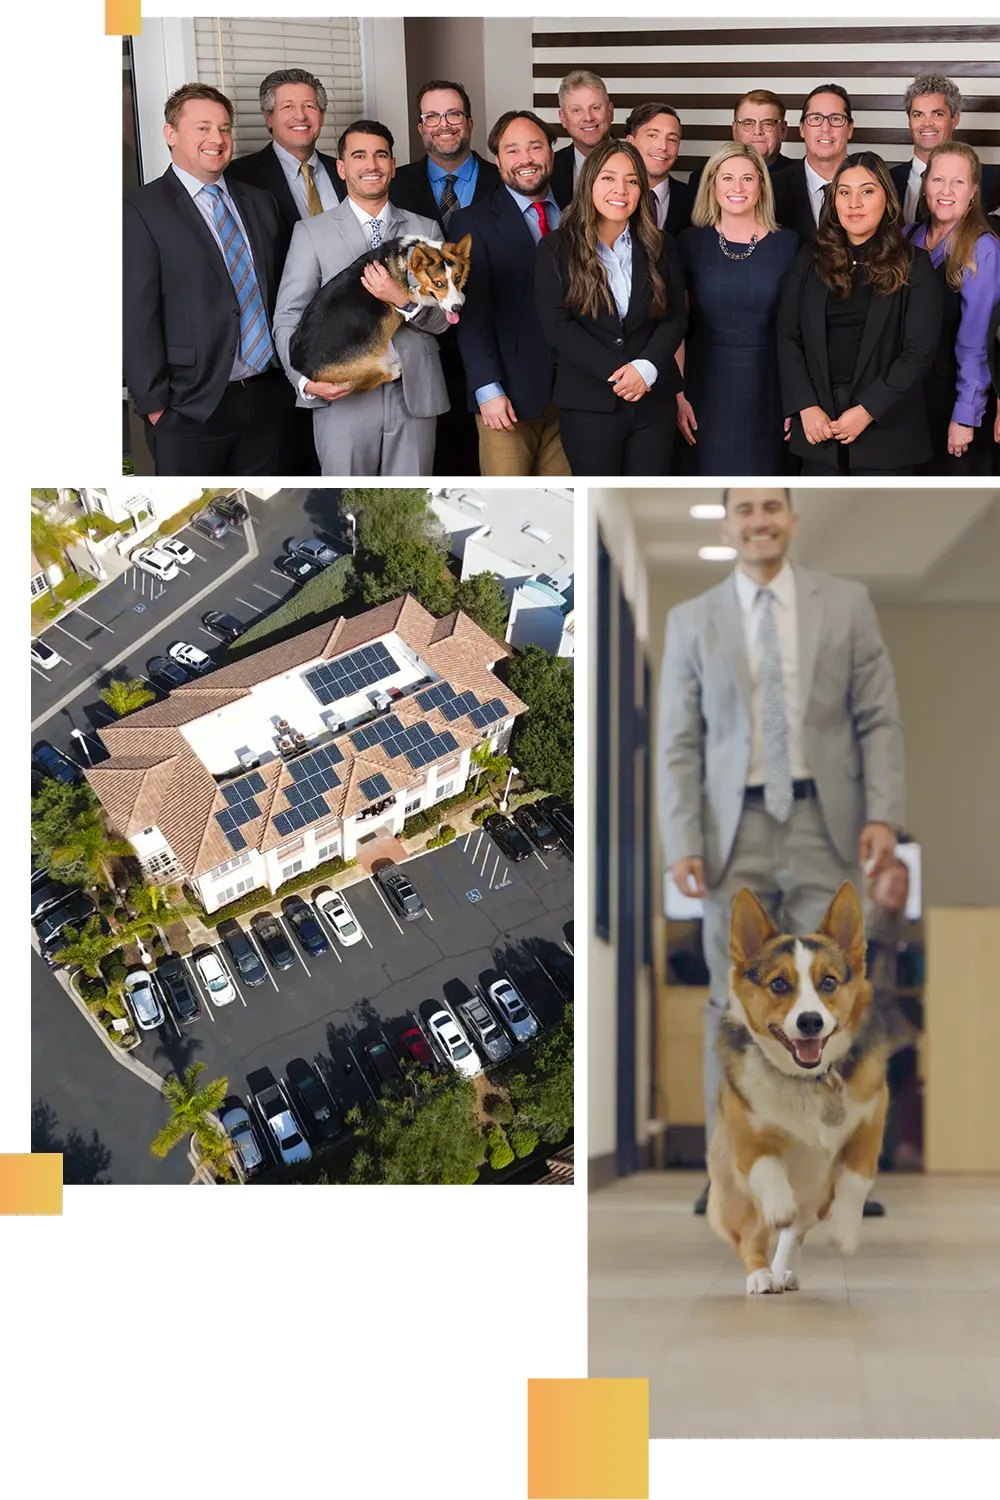 A photo collage of the Global Legal Law Firm team, our beautiful building in San Diego, and a running puppy.